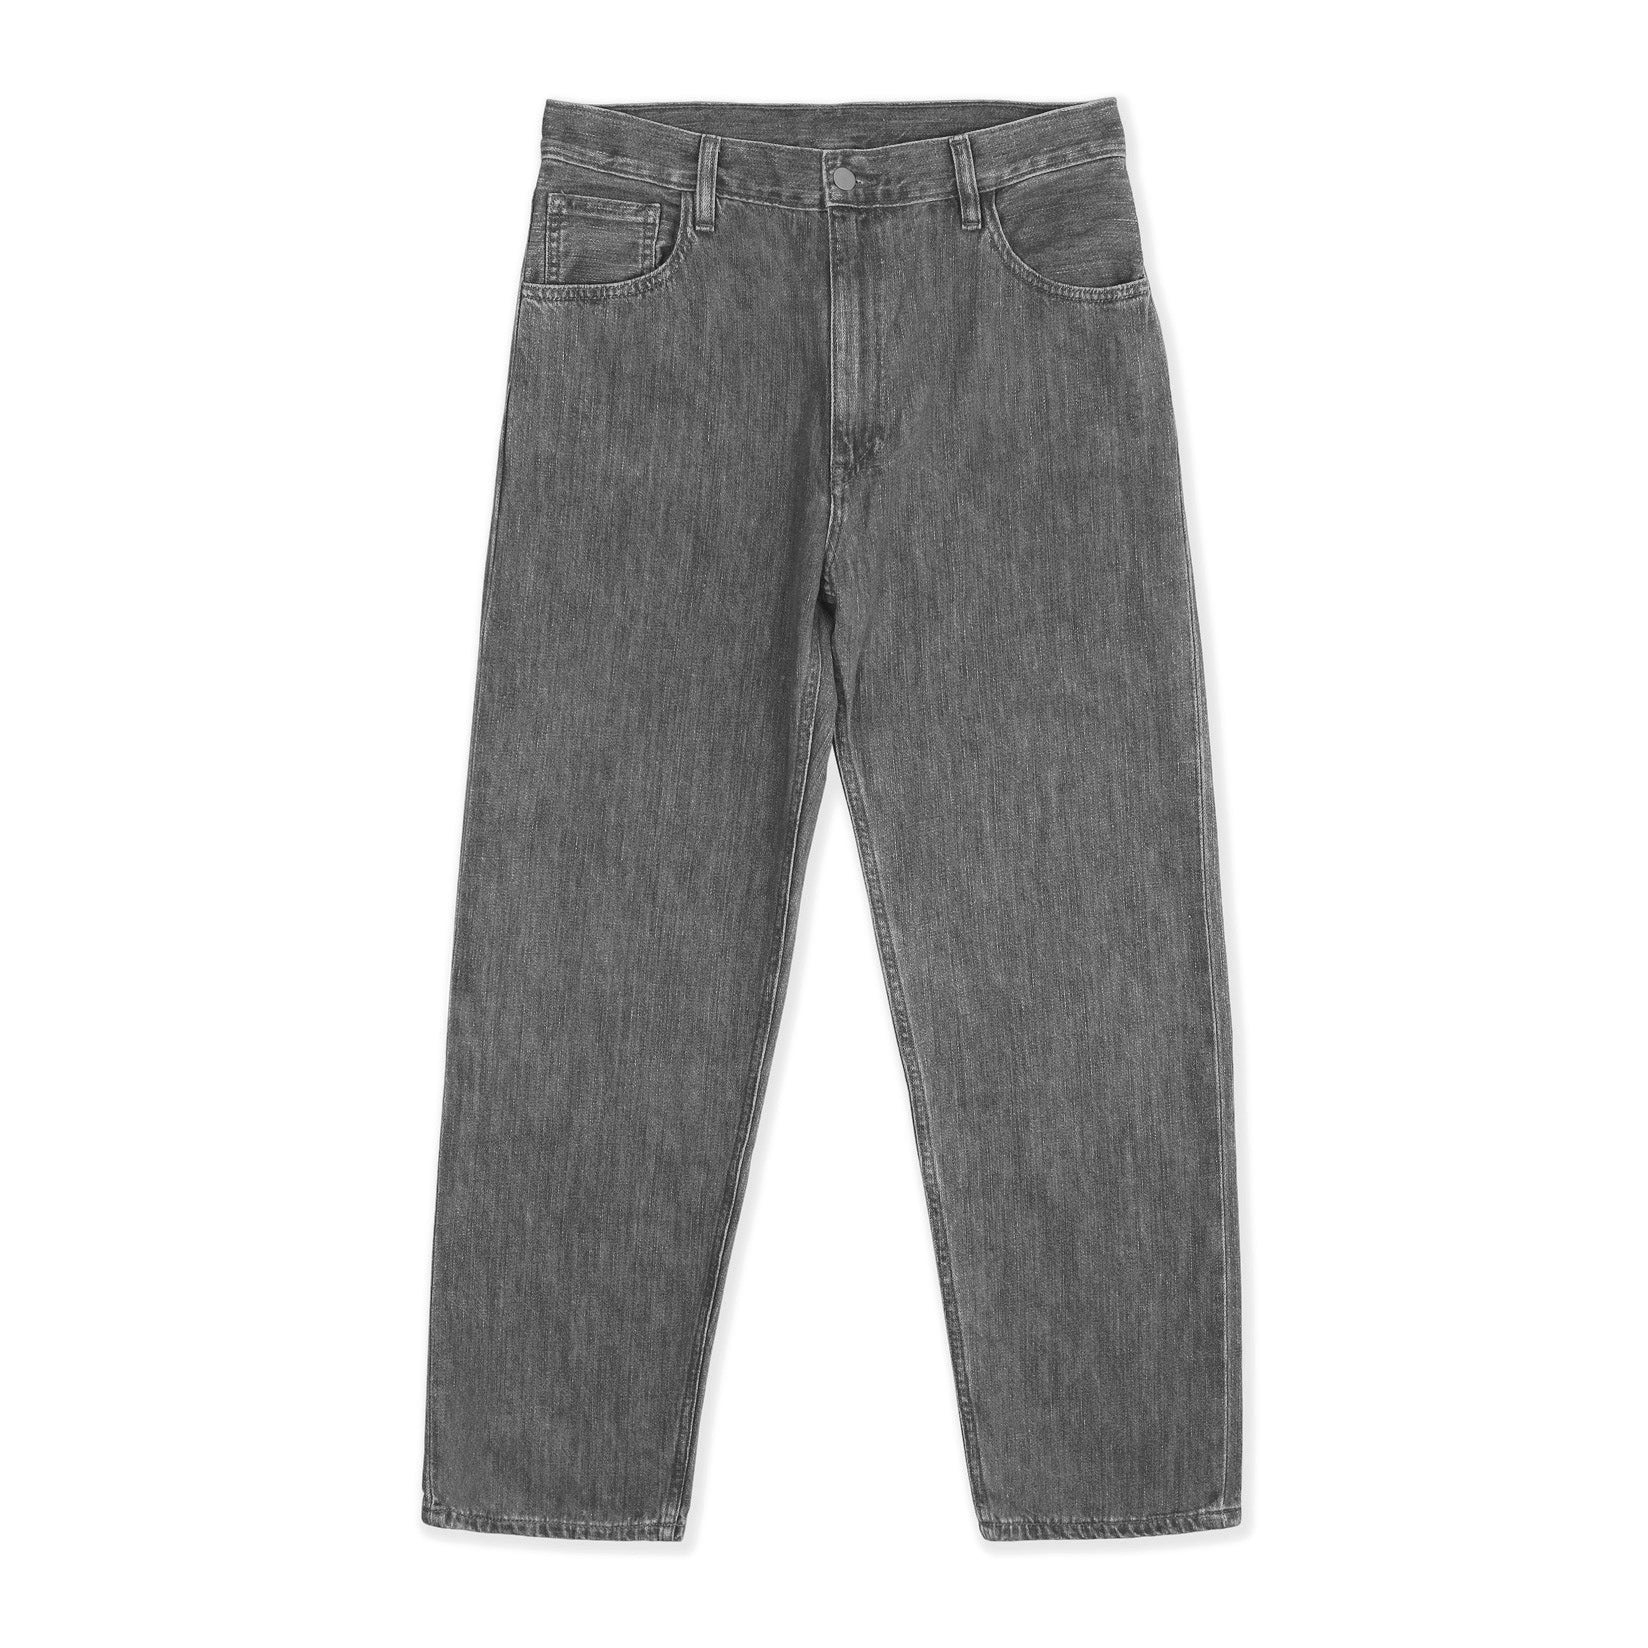 Buy WES Casuals Solid Black Relaxed Fit Denim Jeans from Westside